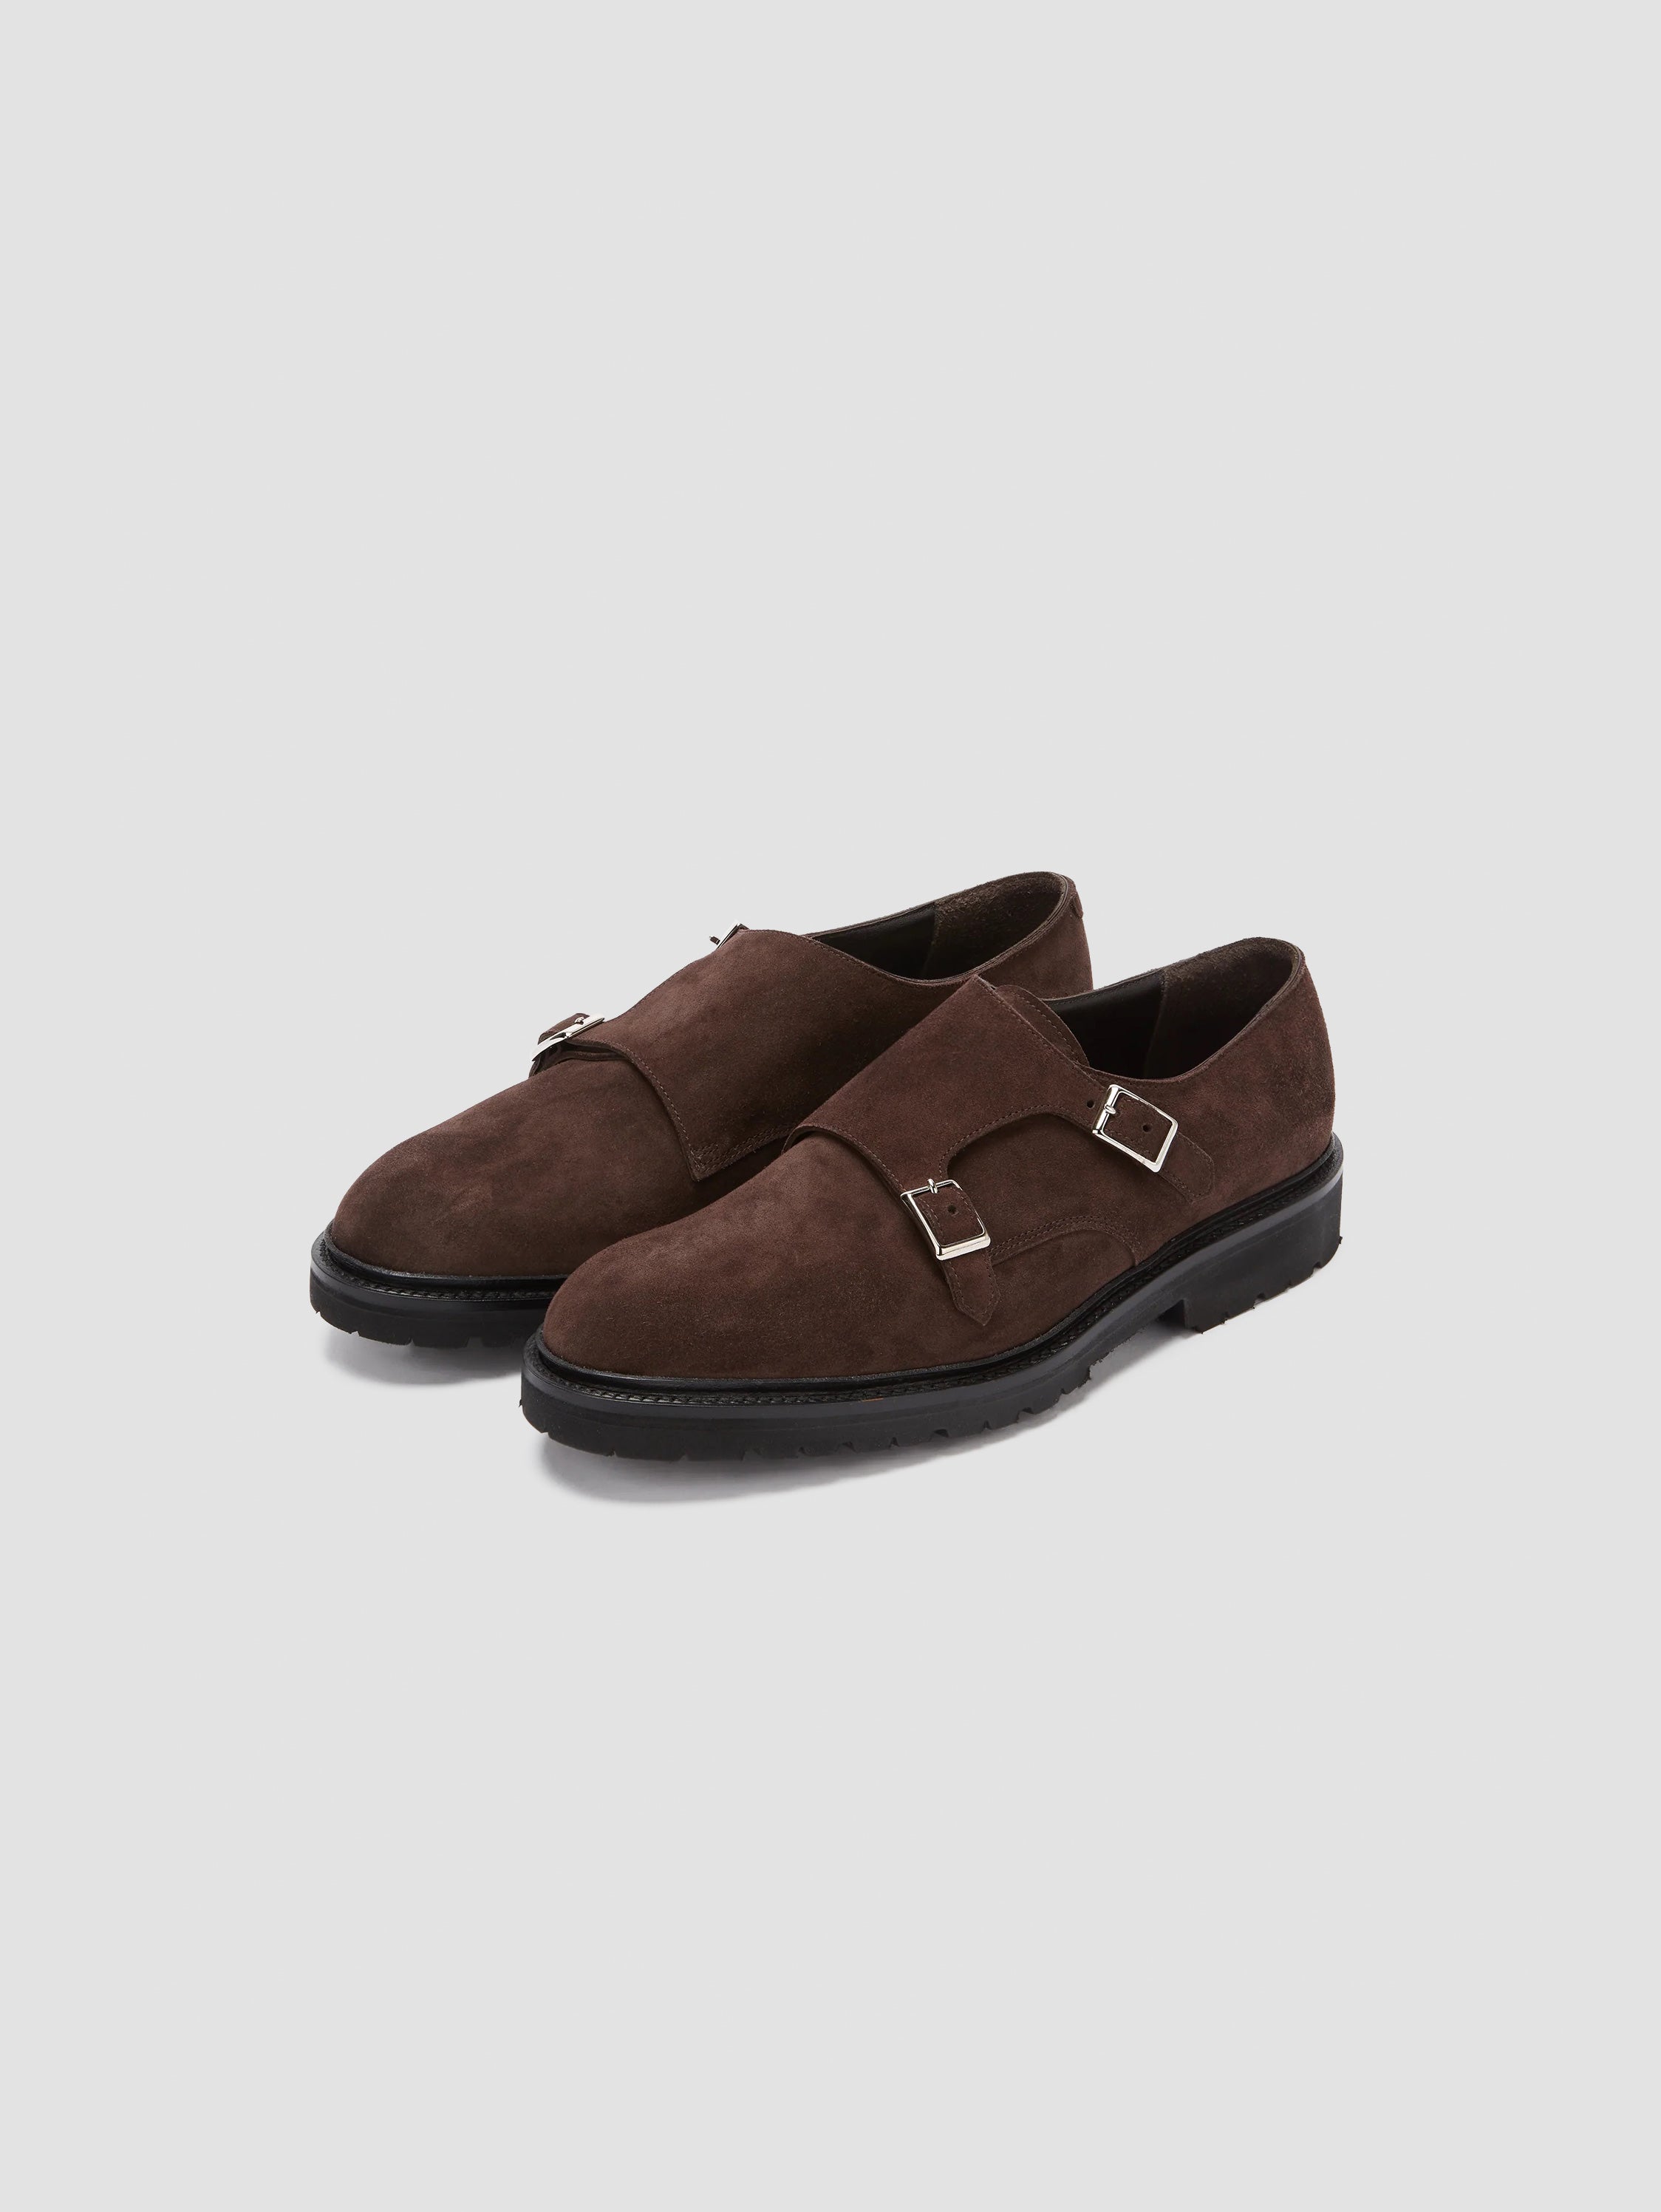 Suede Monk Shoes Brown Product